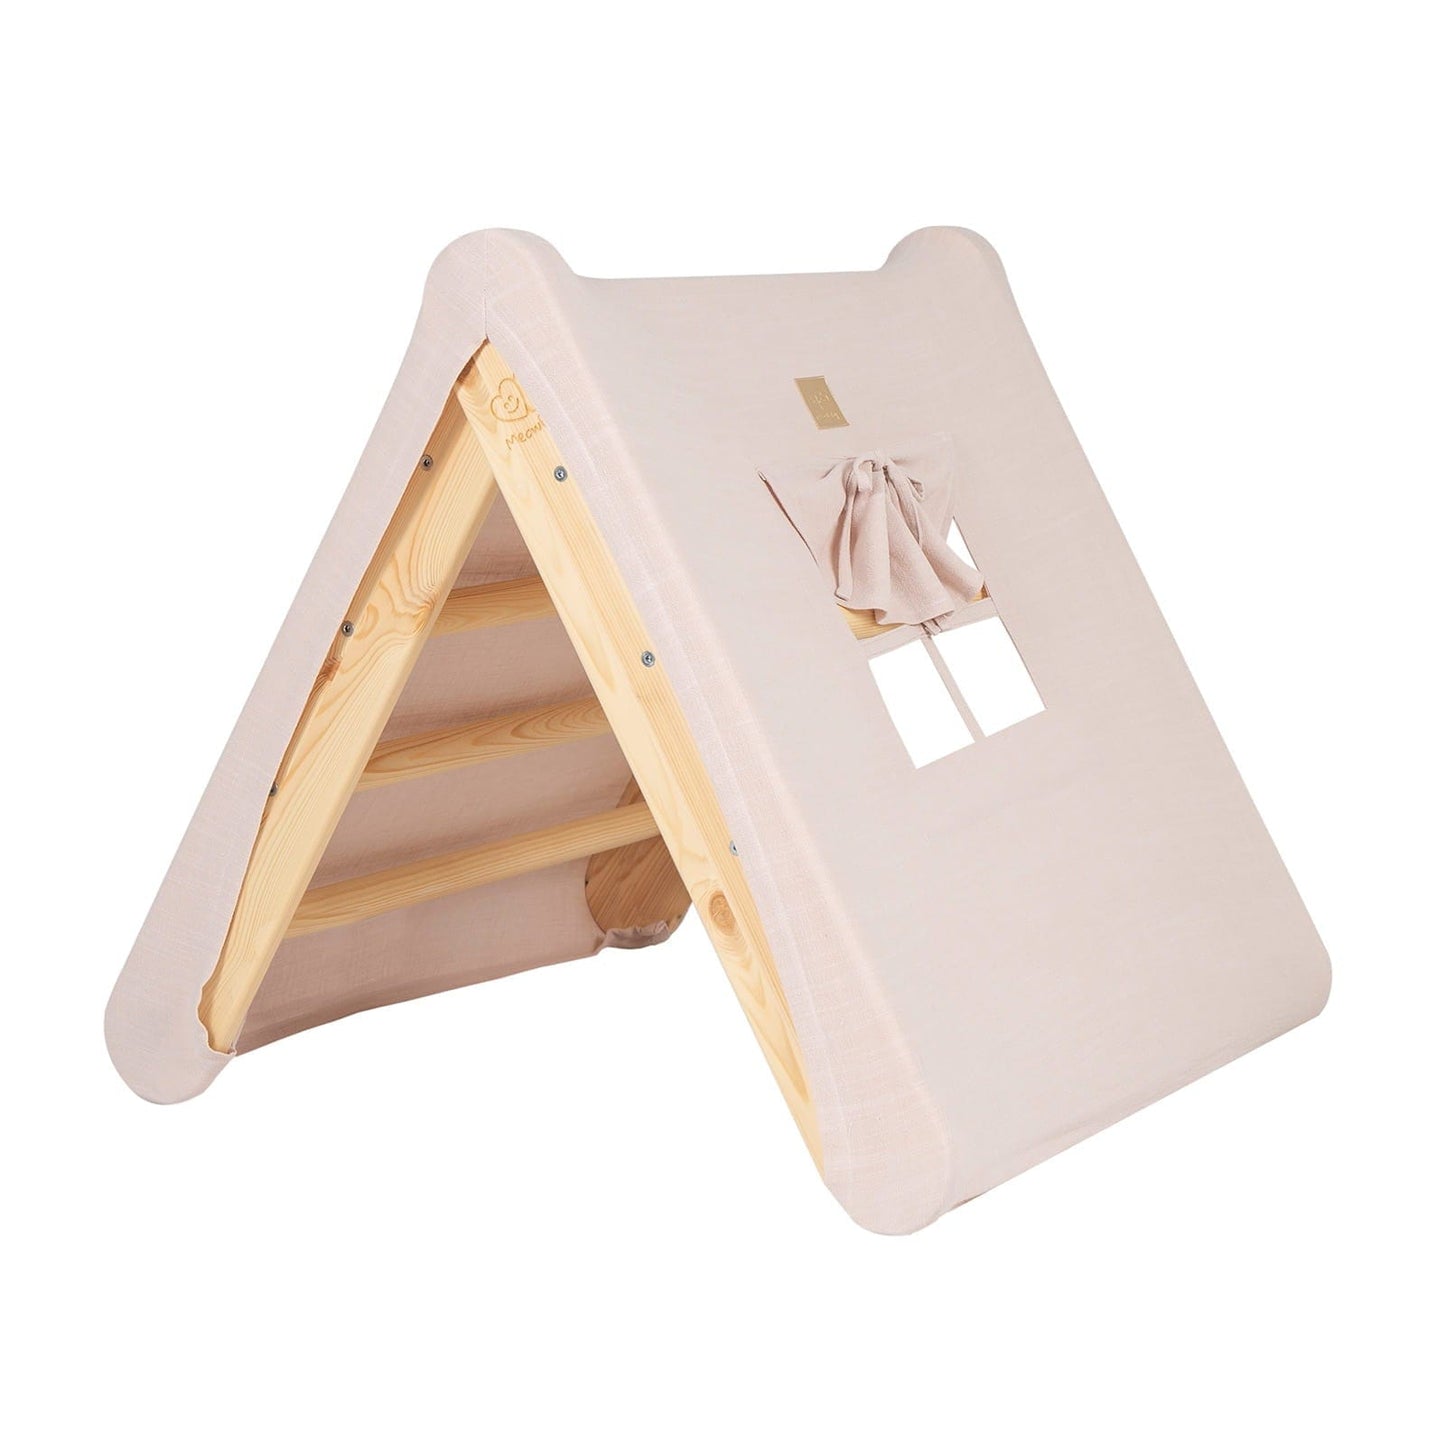 Folding Play House With Ladder For Kids By MeowBaby - Stylemykid.com